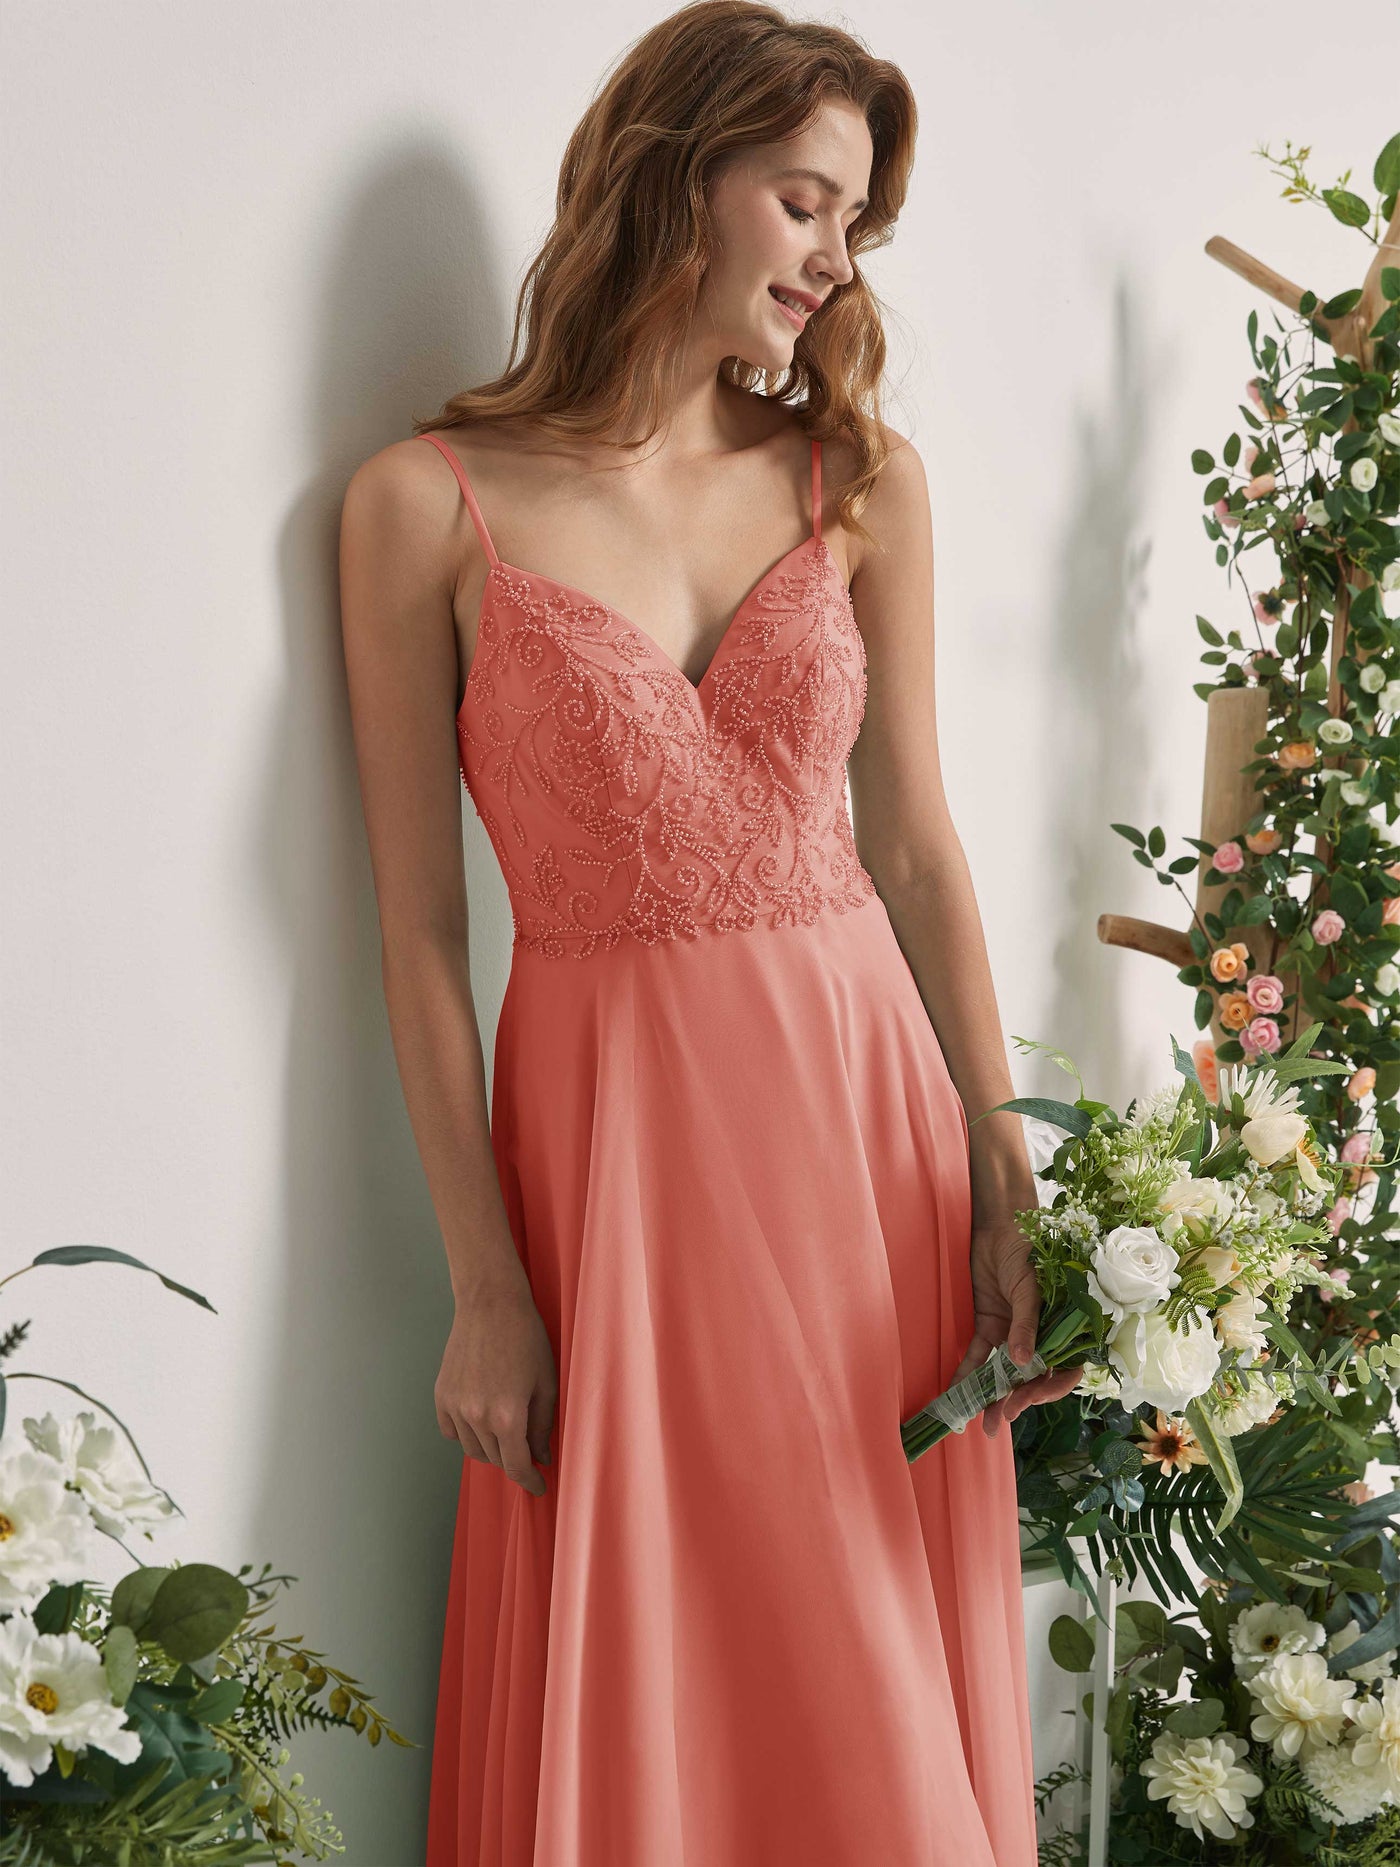 Champagne Rose Bridesmaid Dresses A-line Open back Spaghetti-straps Sleeveless Dresses (83221106)#color_champagne-rose